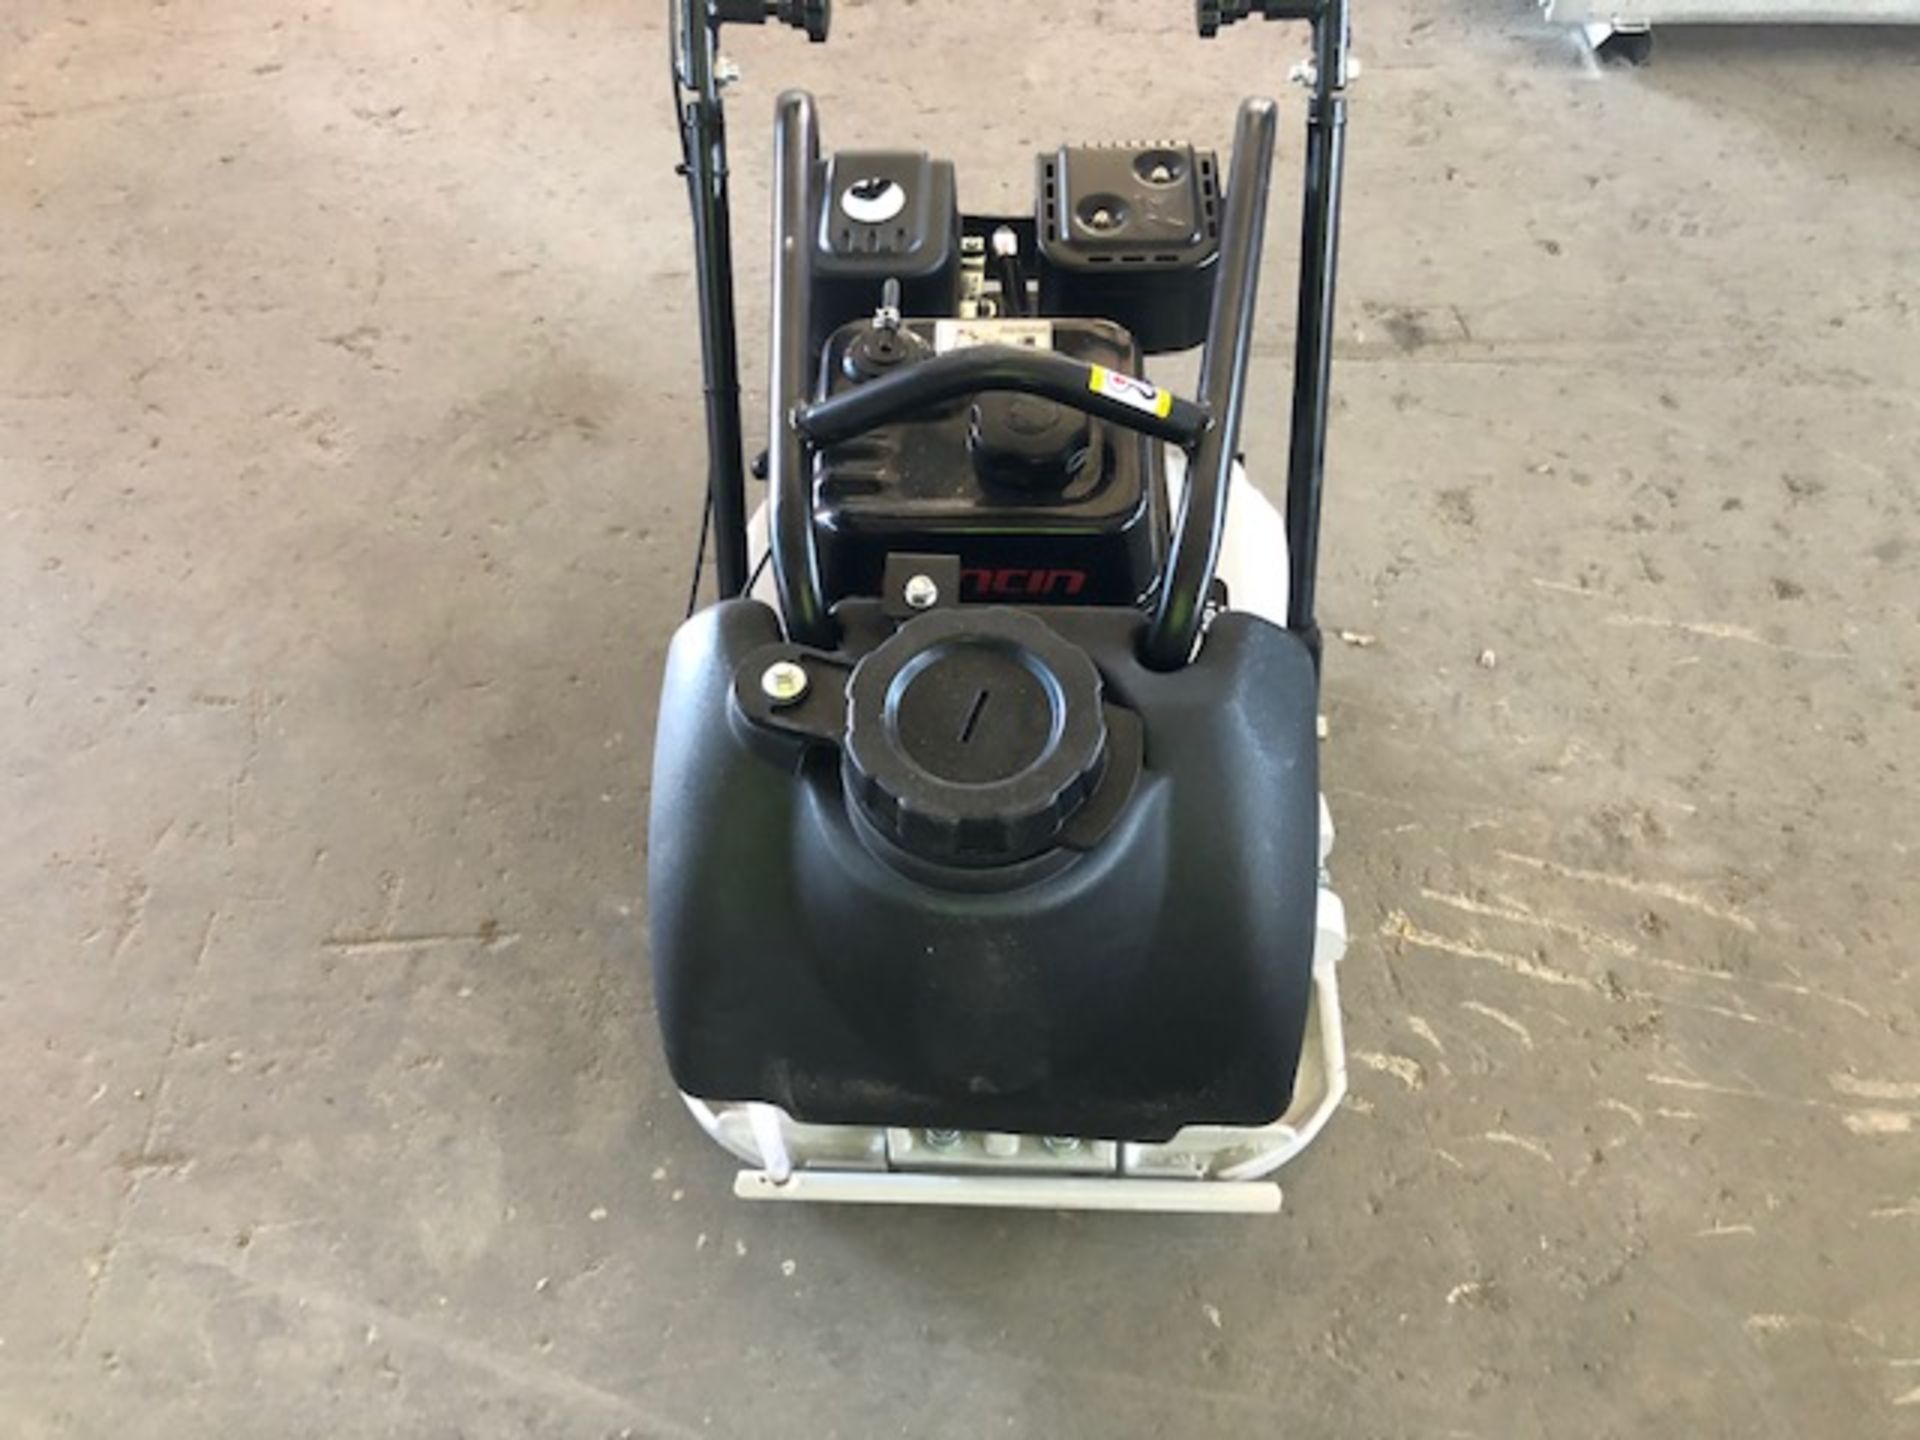 2020 Mustang LF-88 Plate Compactor - Image 3 of 5